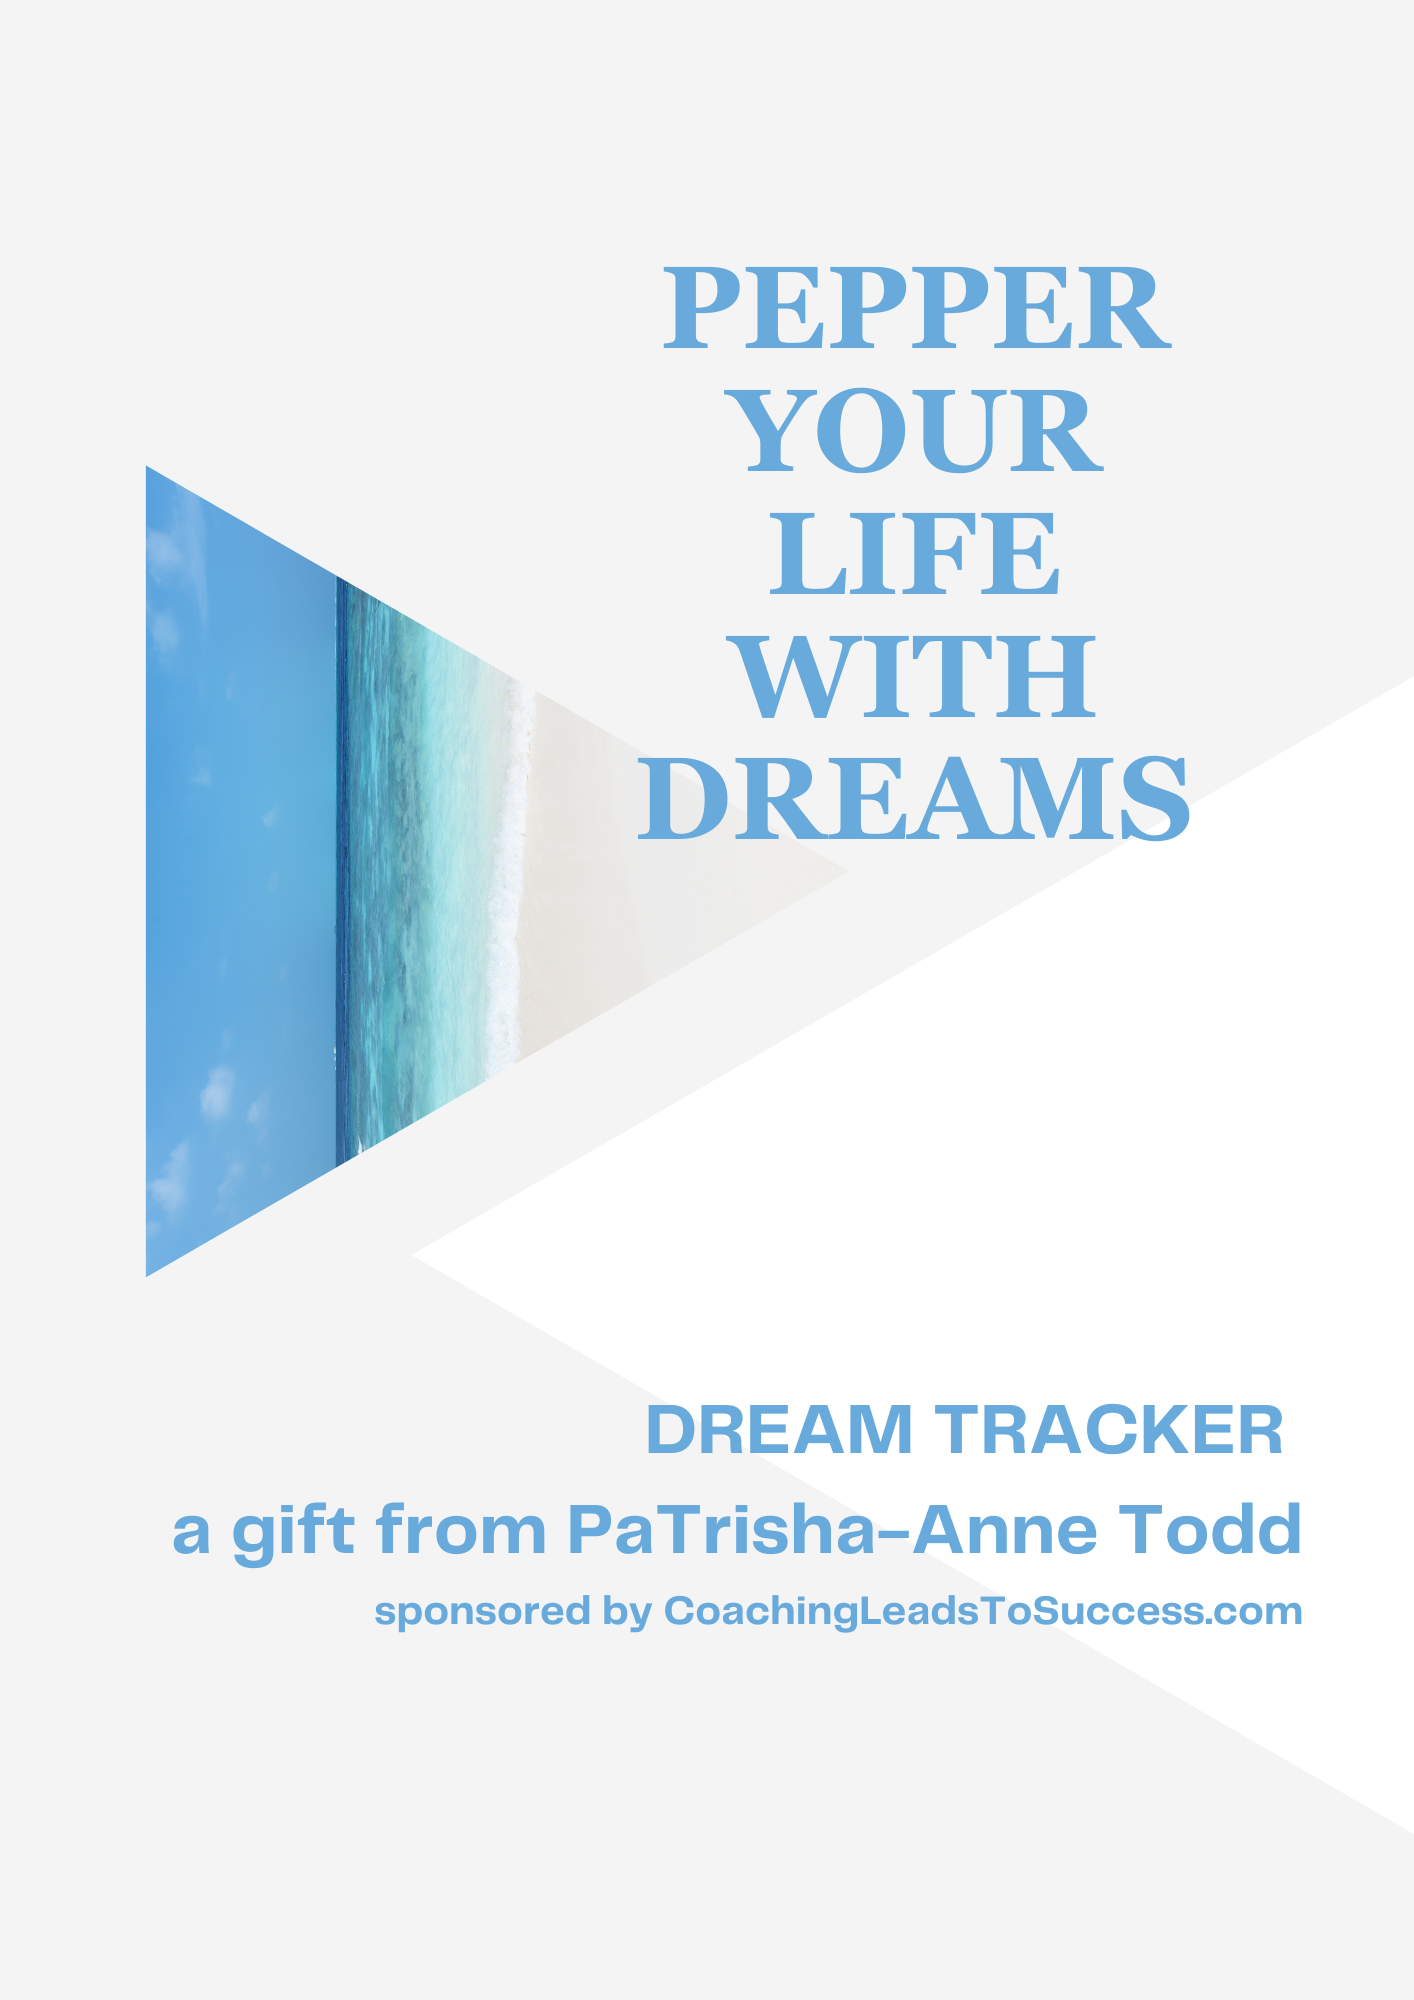 Dream Tracker a gift from PaTrisha-Anne Todd to Pepper Your Life with Dreams